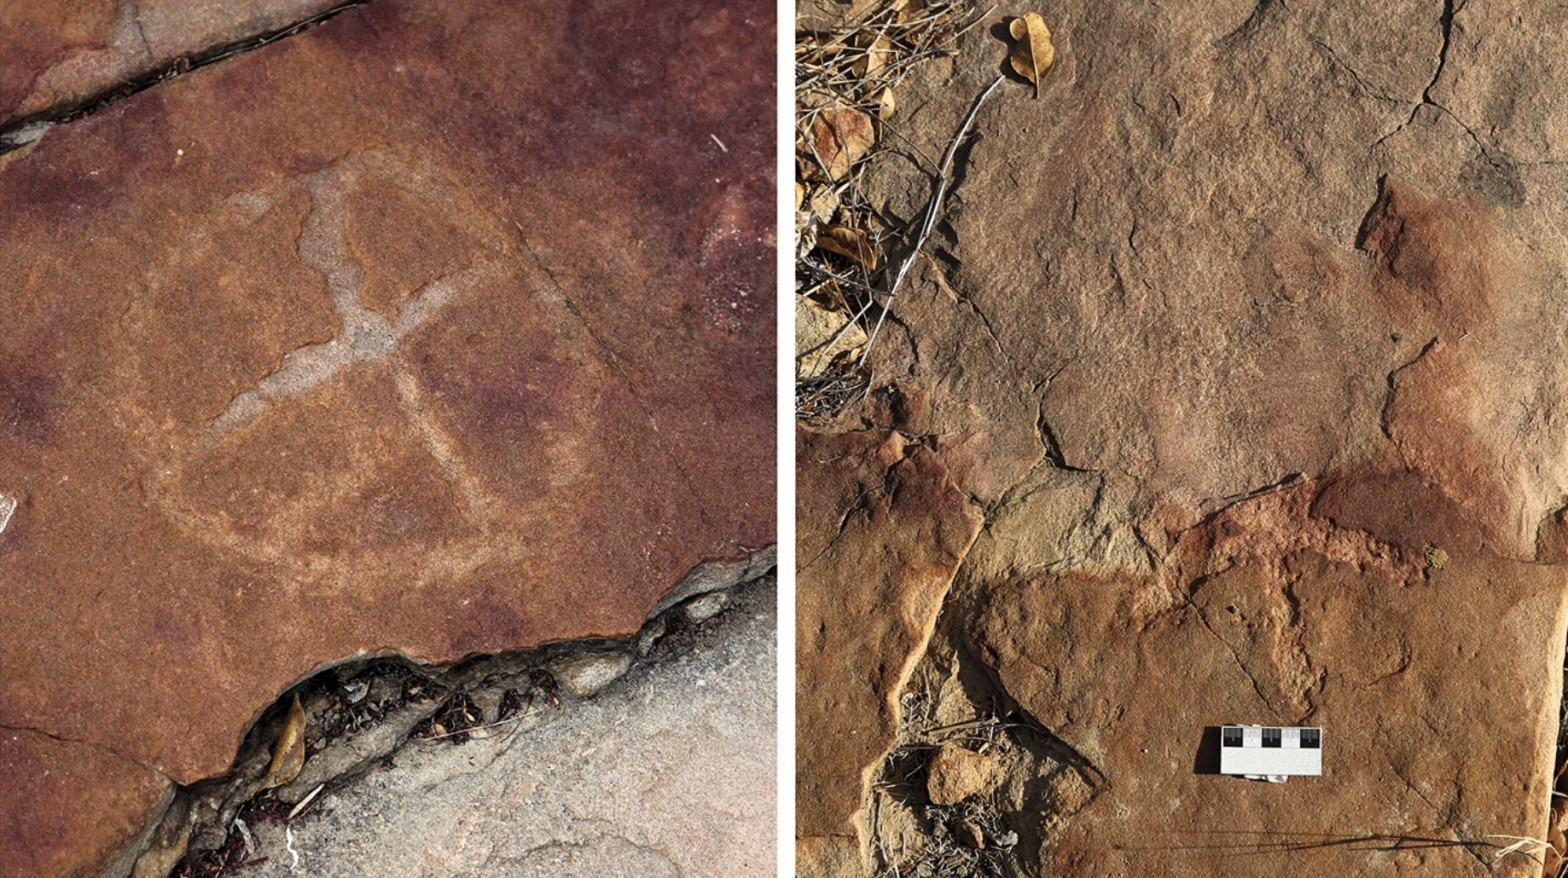 Ancient Humans Left Drawings Next to Dinosaur Footprints in Brazil